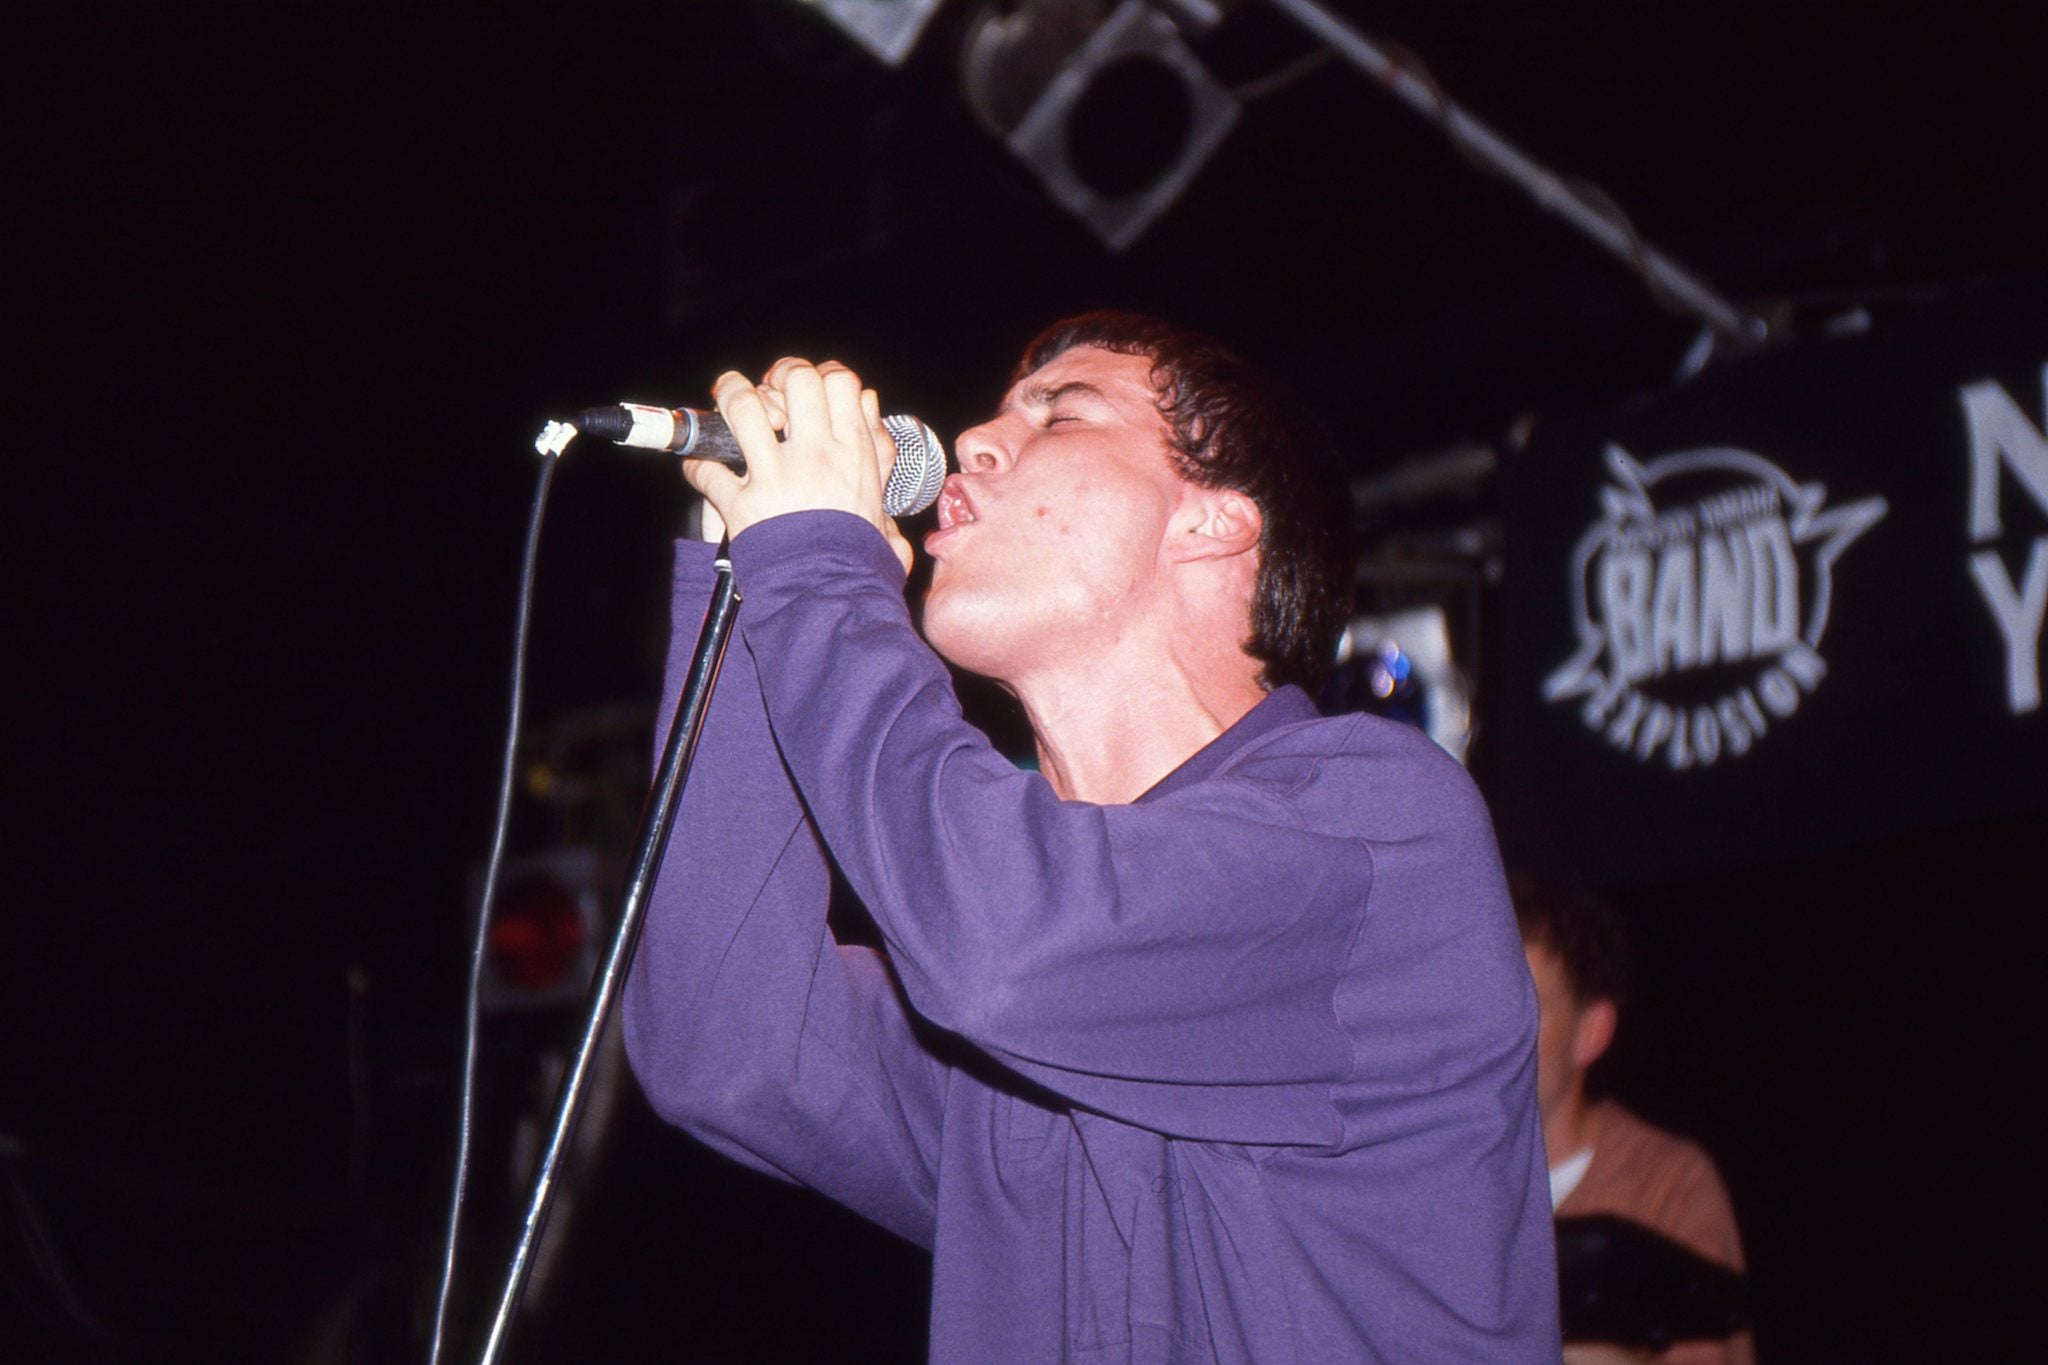 Lead singer Liam Maher died of a heroin overdose aged 41 in 2009